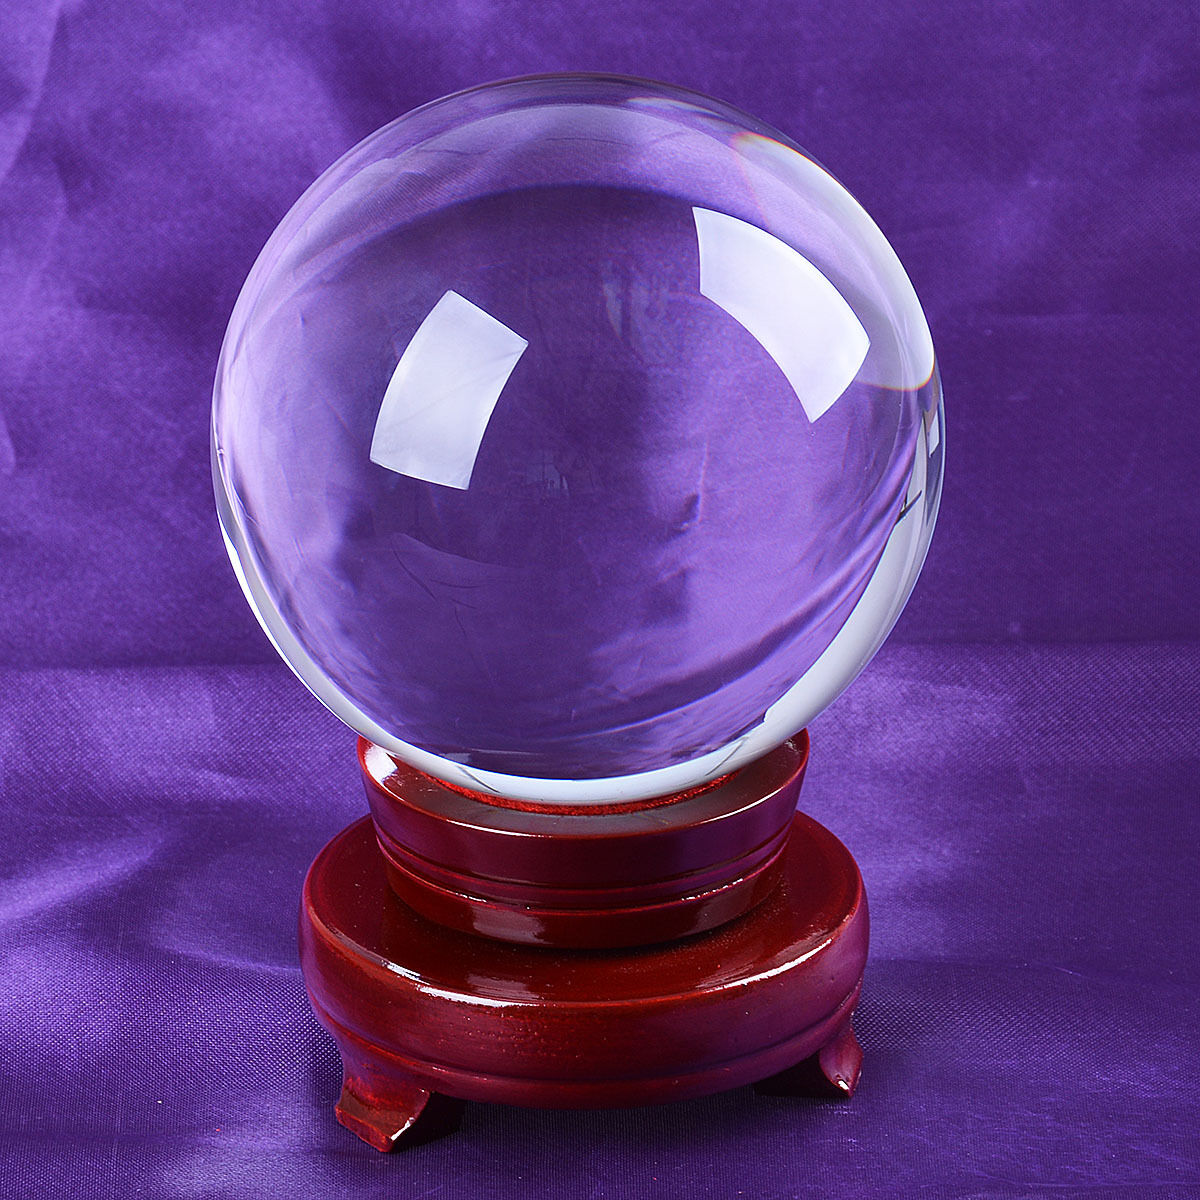 LONGWIN 120MM Clear Crystal Ball Meditation Glass Sphere Photo Prop Free Stand